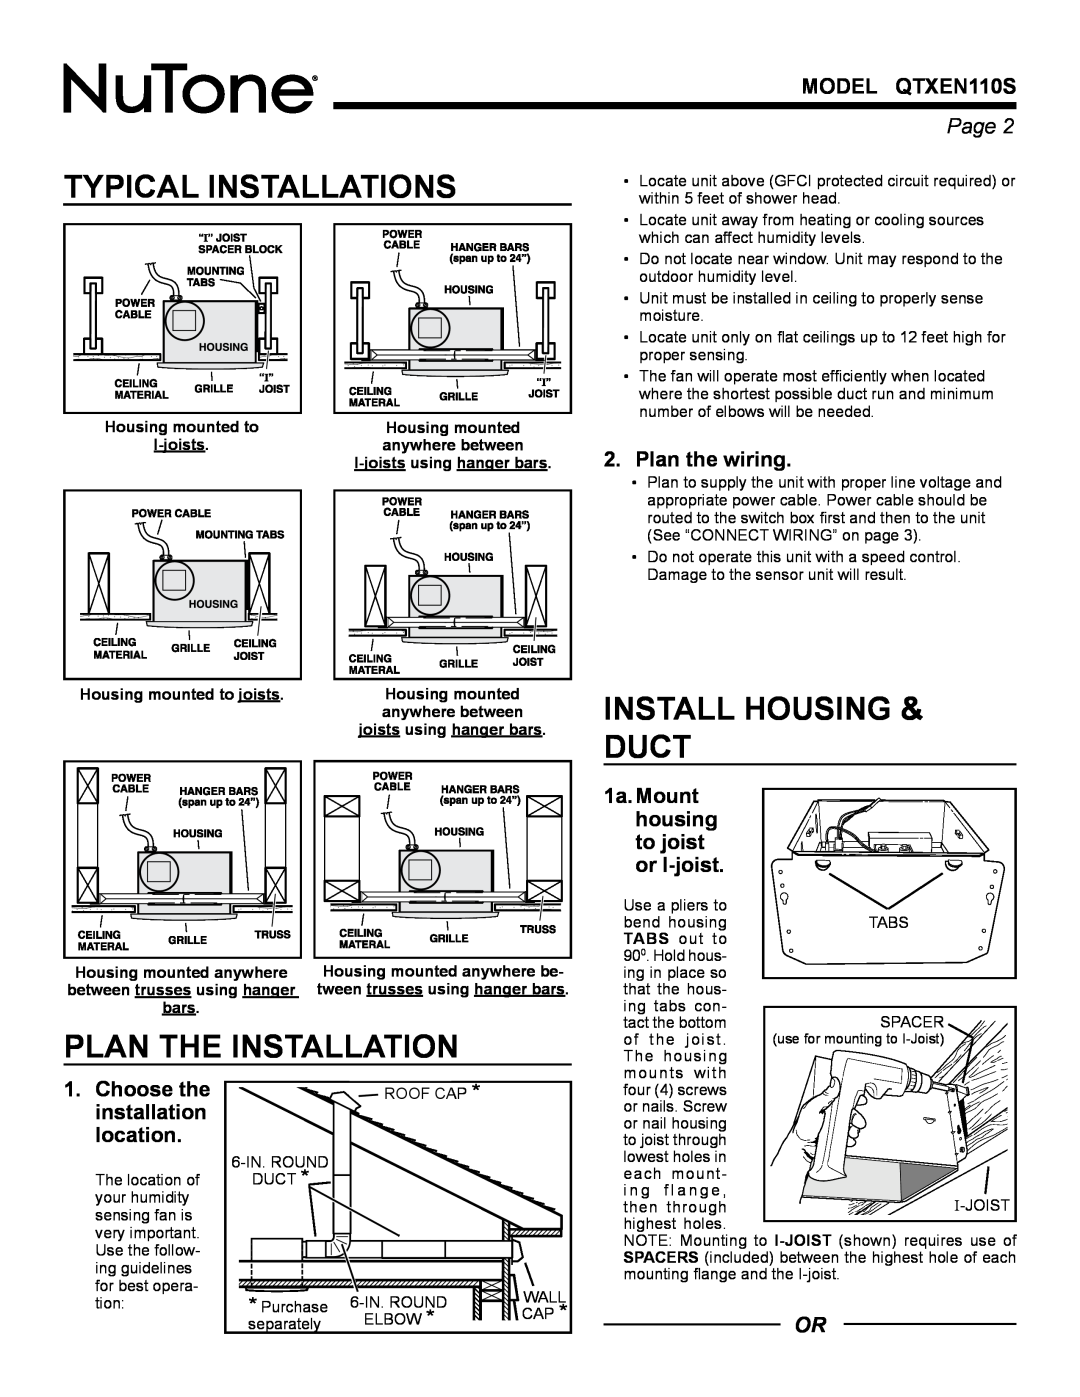 NuTone Typical Installations, Plan The Installation, Install Housing & Duct, MODEL QTXEN110S, Page , Plan the wiring 